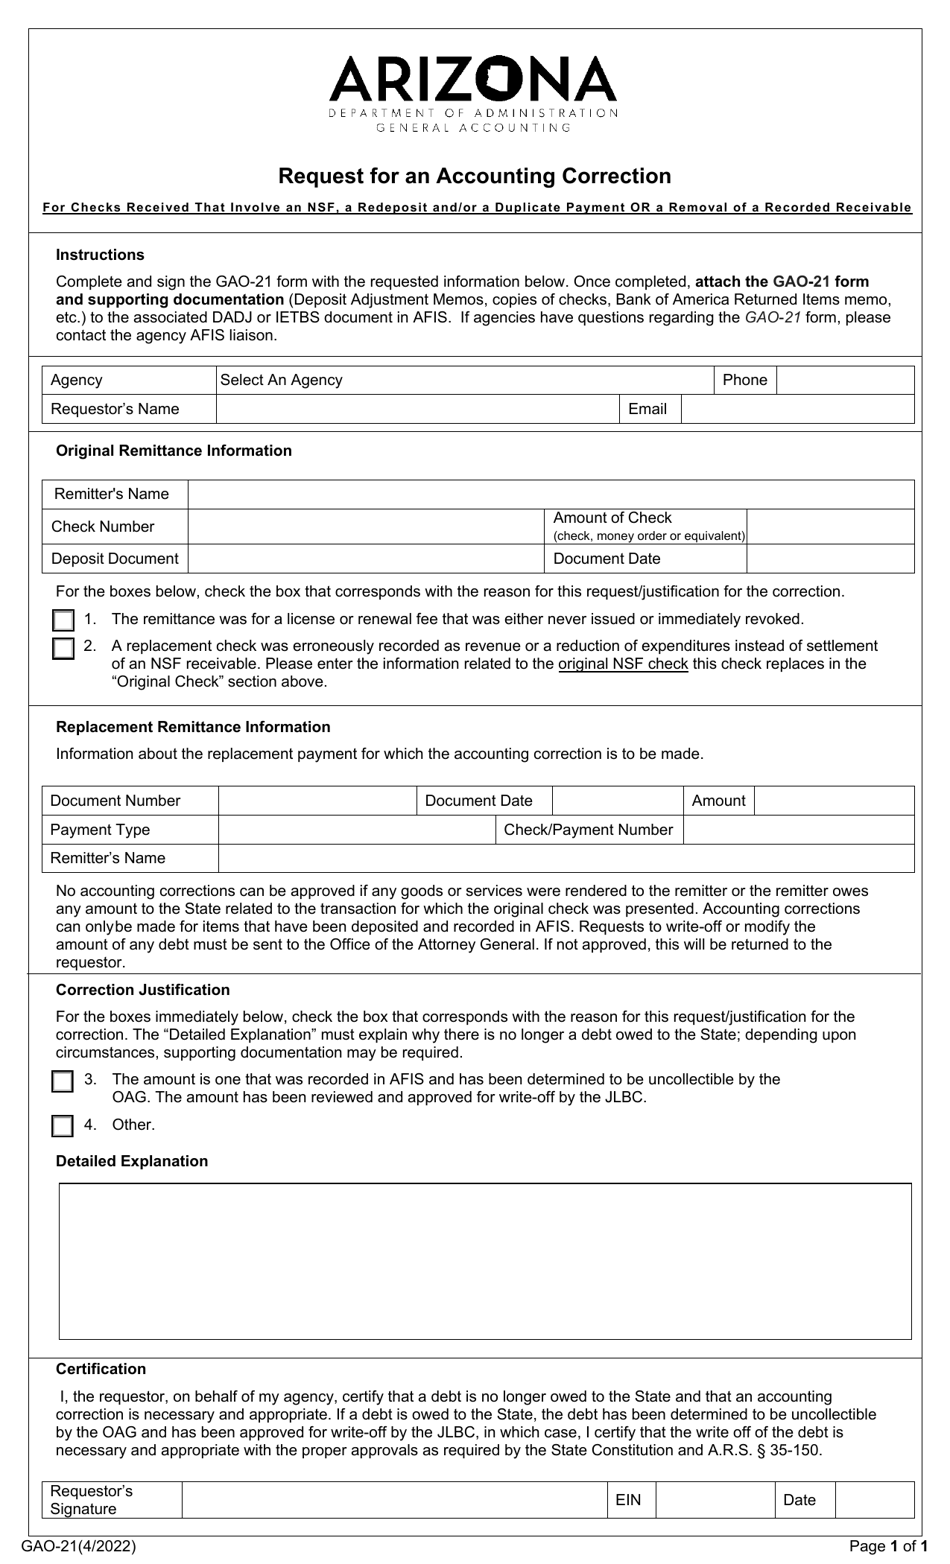 Form GAO-21 Request for an Accounting Correction - Arizona, Page 1